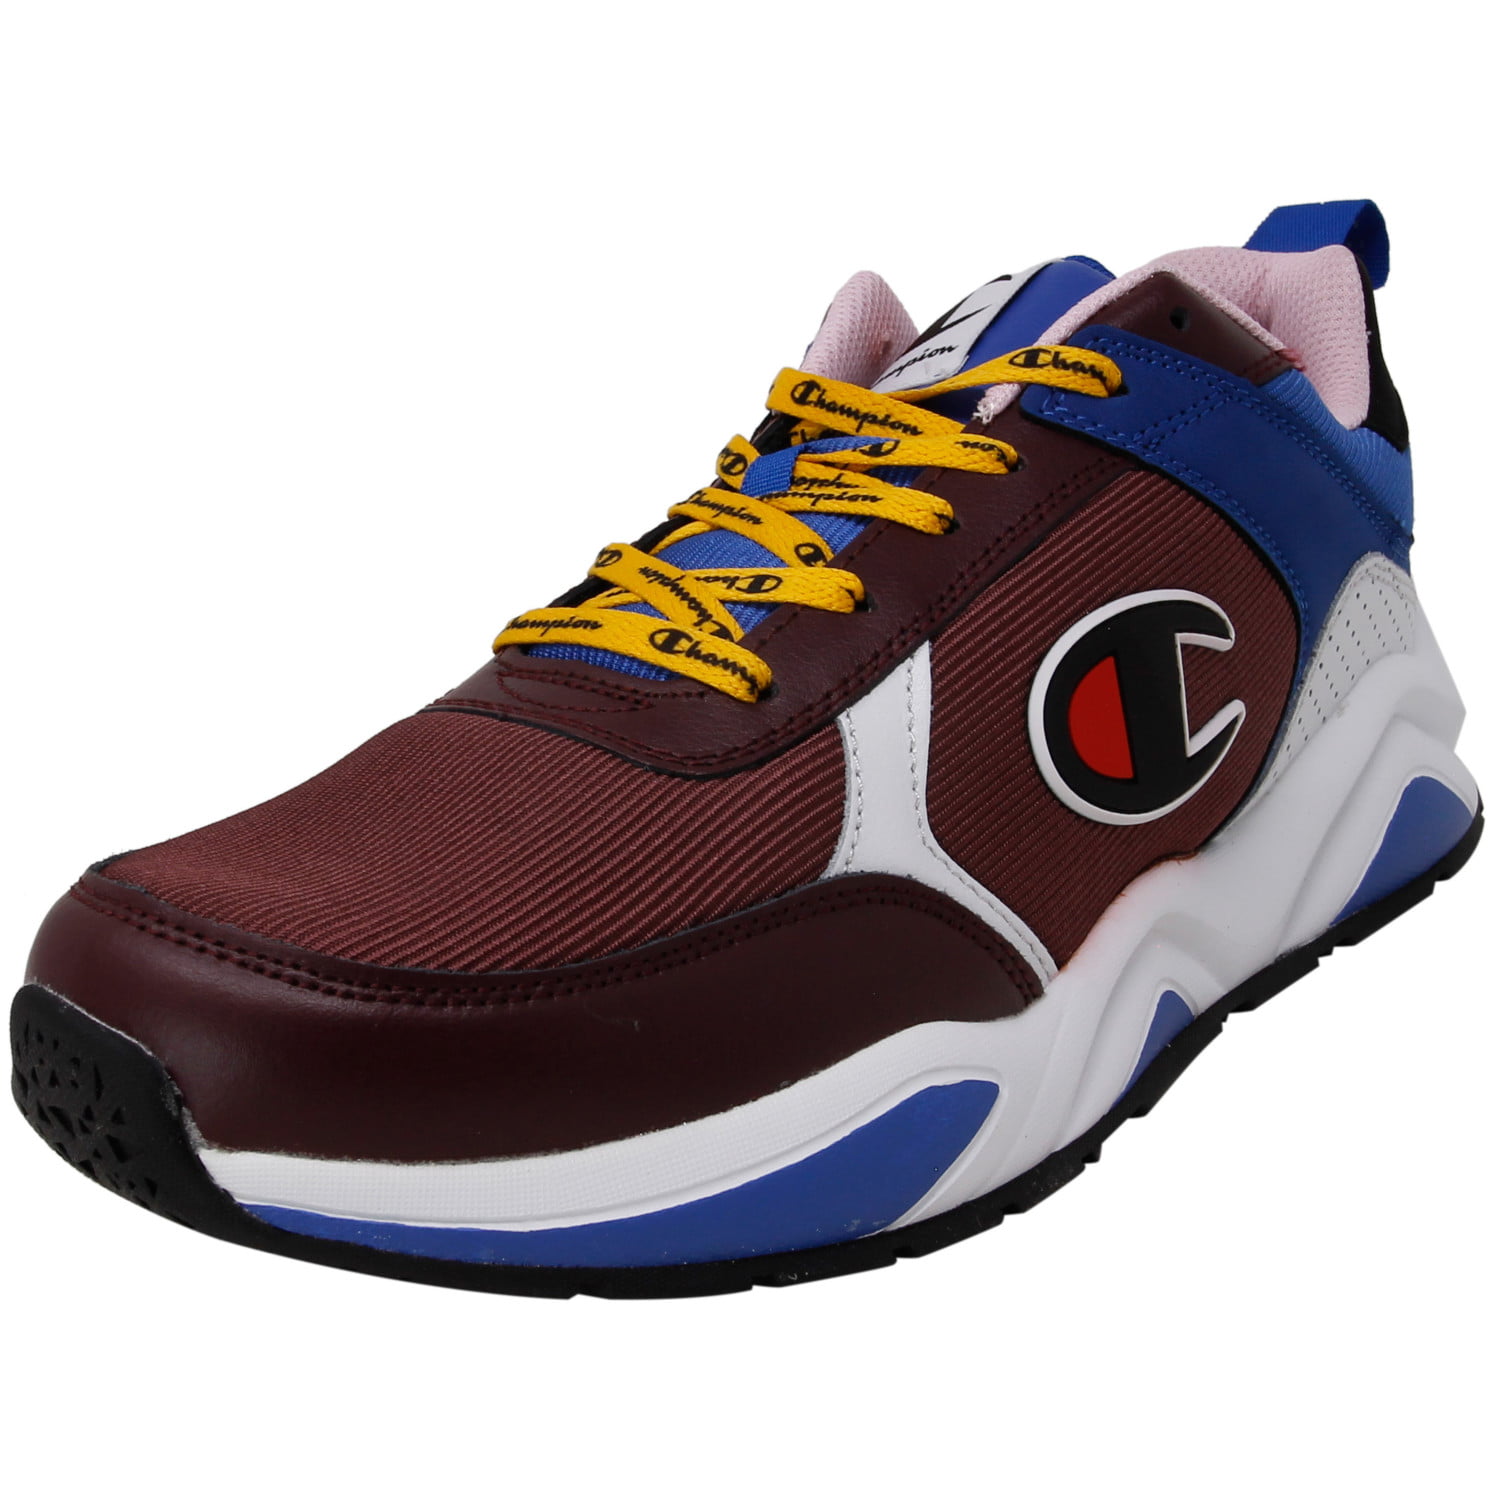 Champion Mens 93Eighteen Big C Low-Top Casual Fashion Sneakers Shoes BHFO 3964 